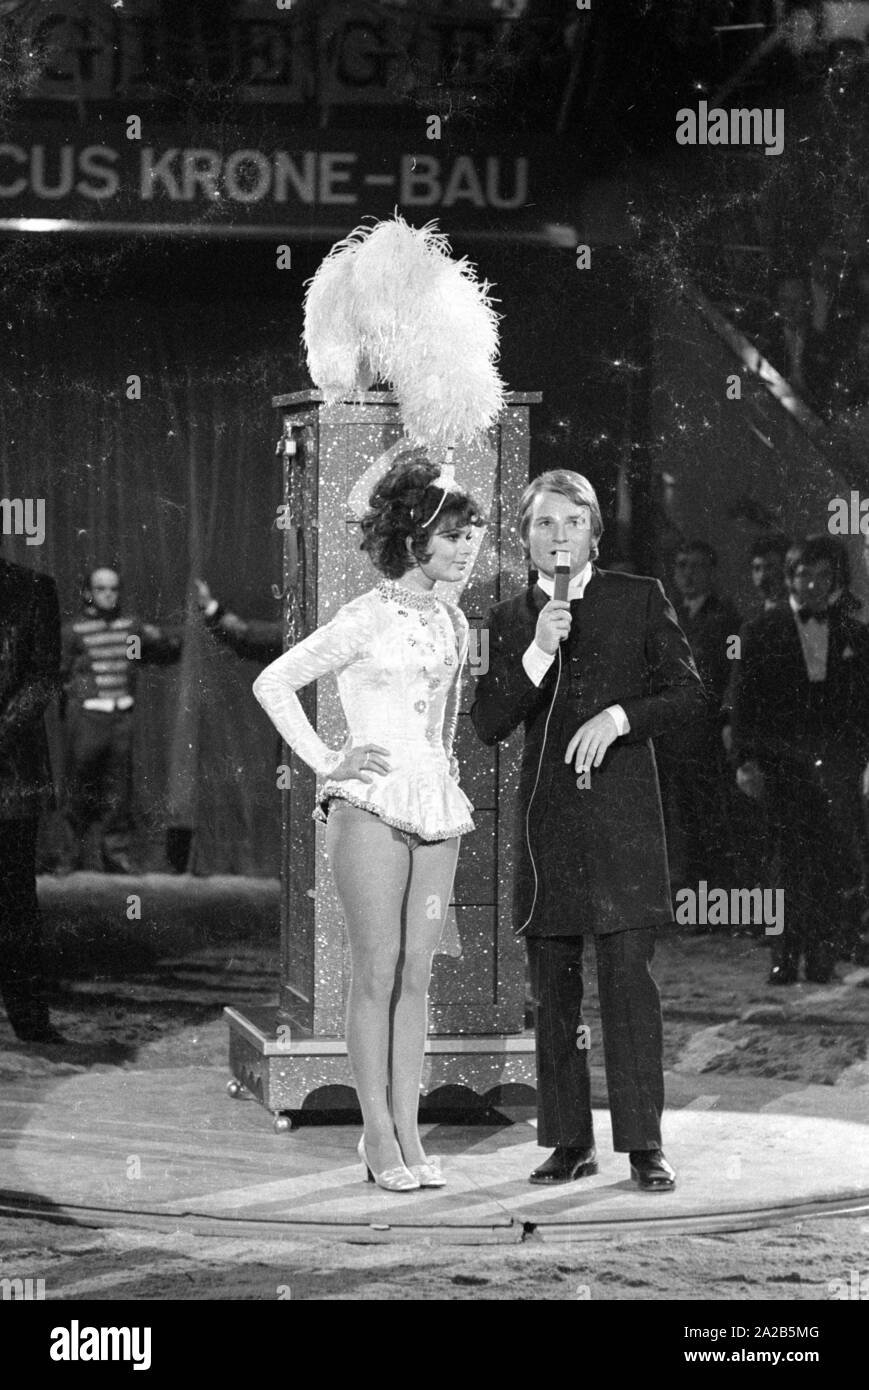 In the program of the charity TV show 'Die Goldene Zehn' (also known as 'Stars in der Manege') the actors Fritz Wepper and Uschi Glas appear as a magician and assistant. Uschi Glas wears a big feather headdress. The performance was probably the 'disappearance' of Uschi Glas in the closet. Stock Photo